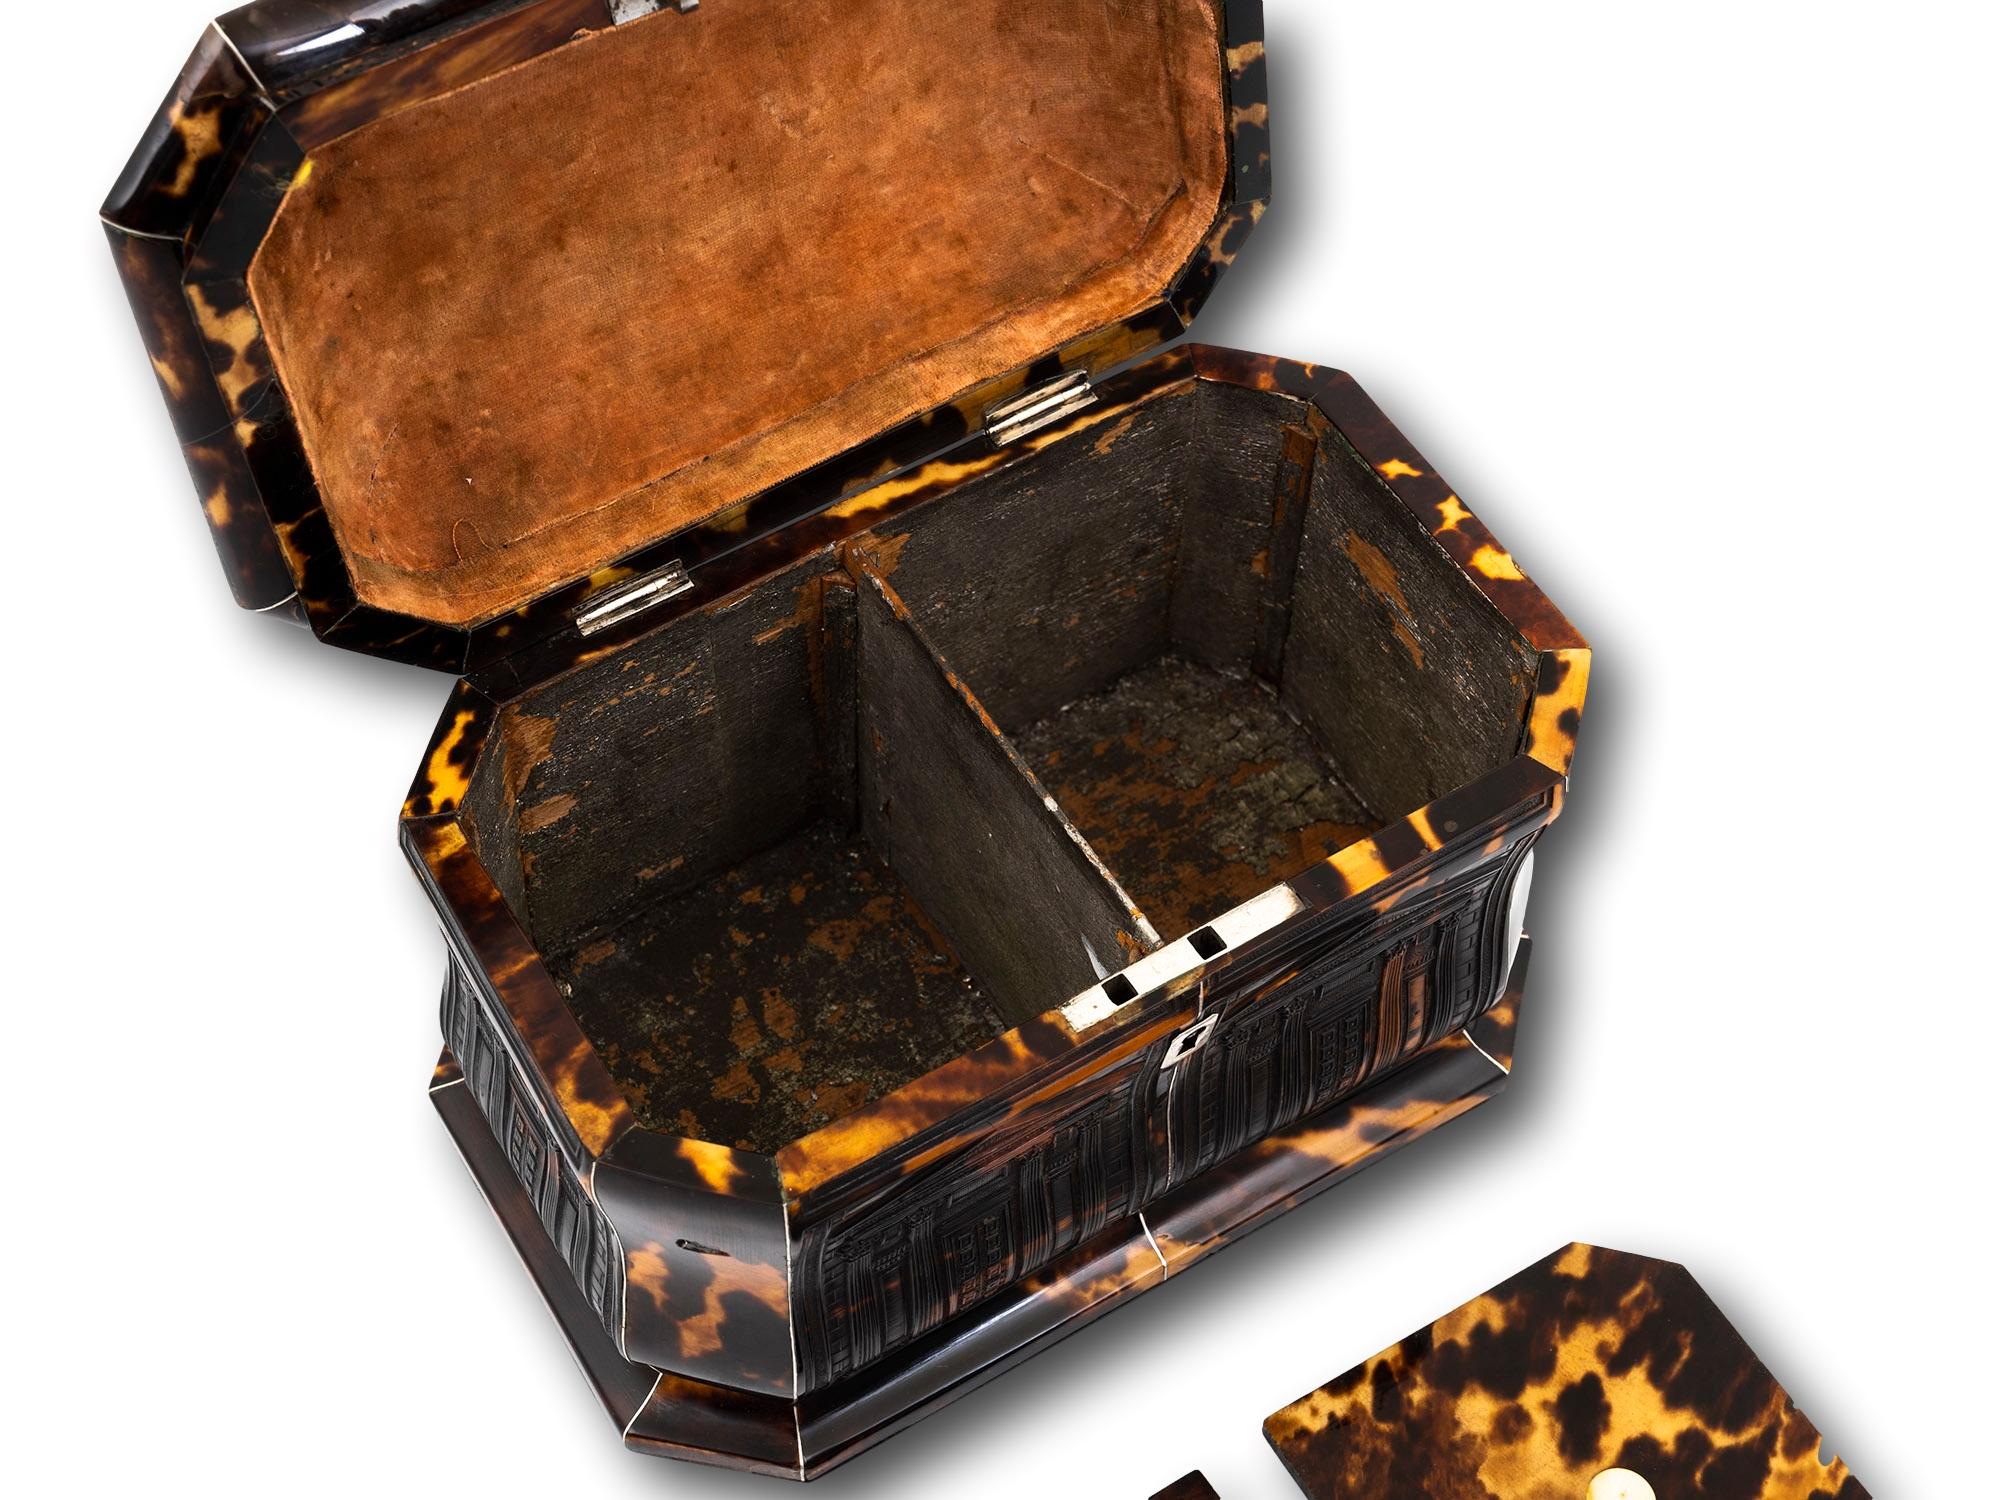 Rare Regency Architectural Pressed Tortoiseshell Tea Caddy For Sale 3